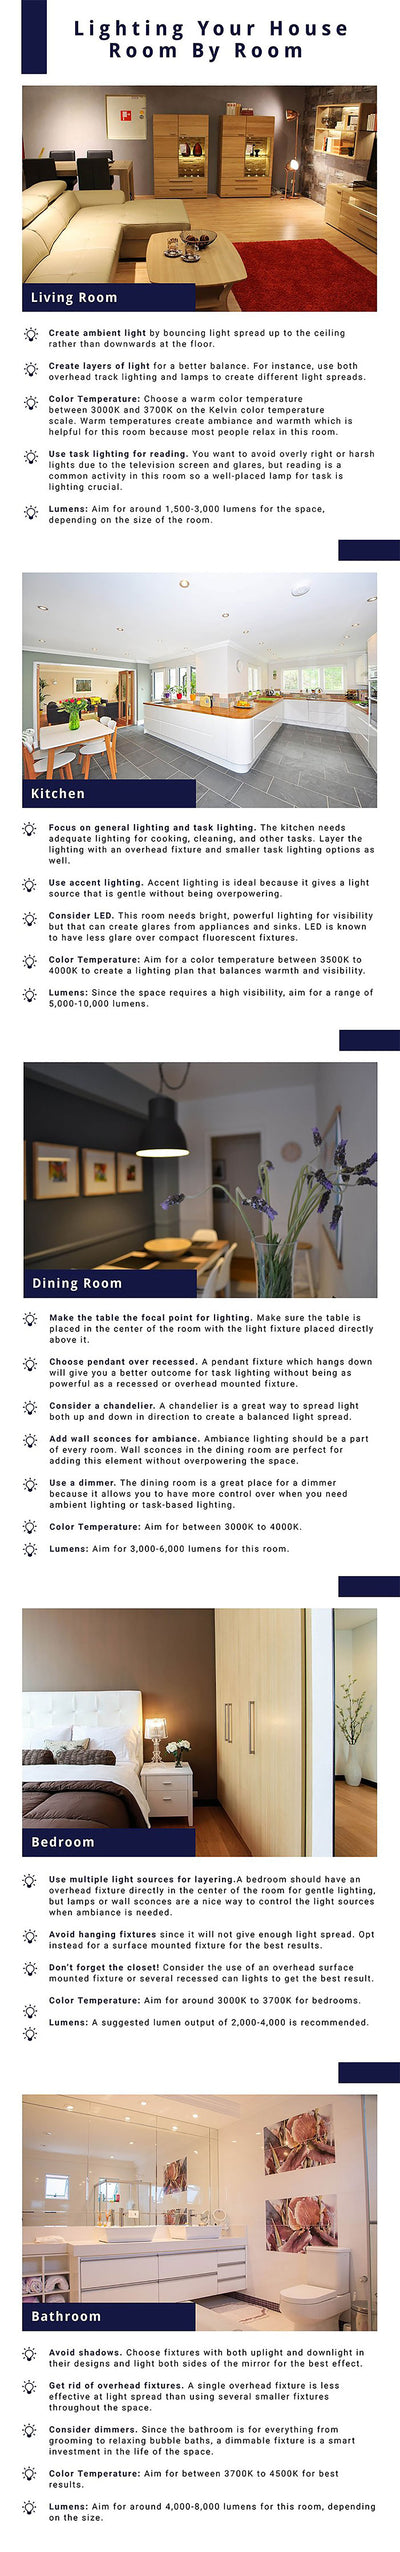 Lighting Your House Room By Room [INFOGRAPHIC]